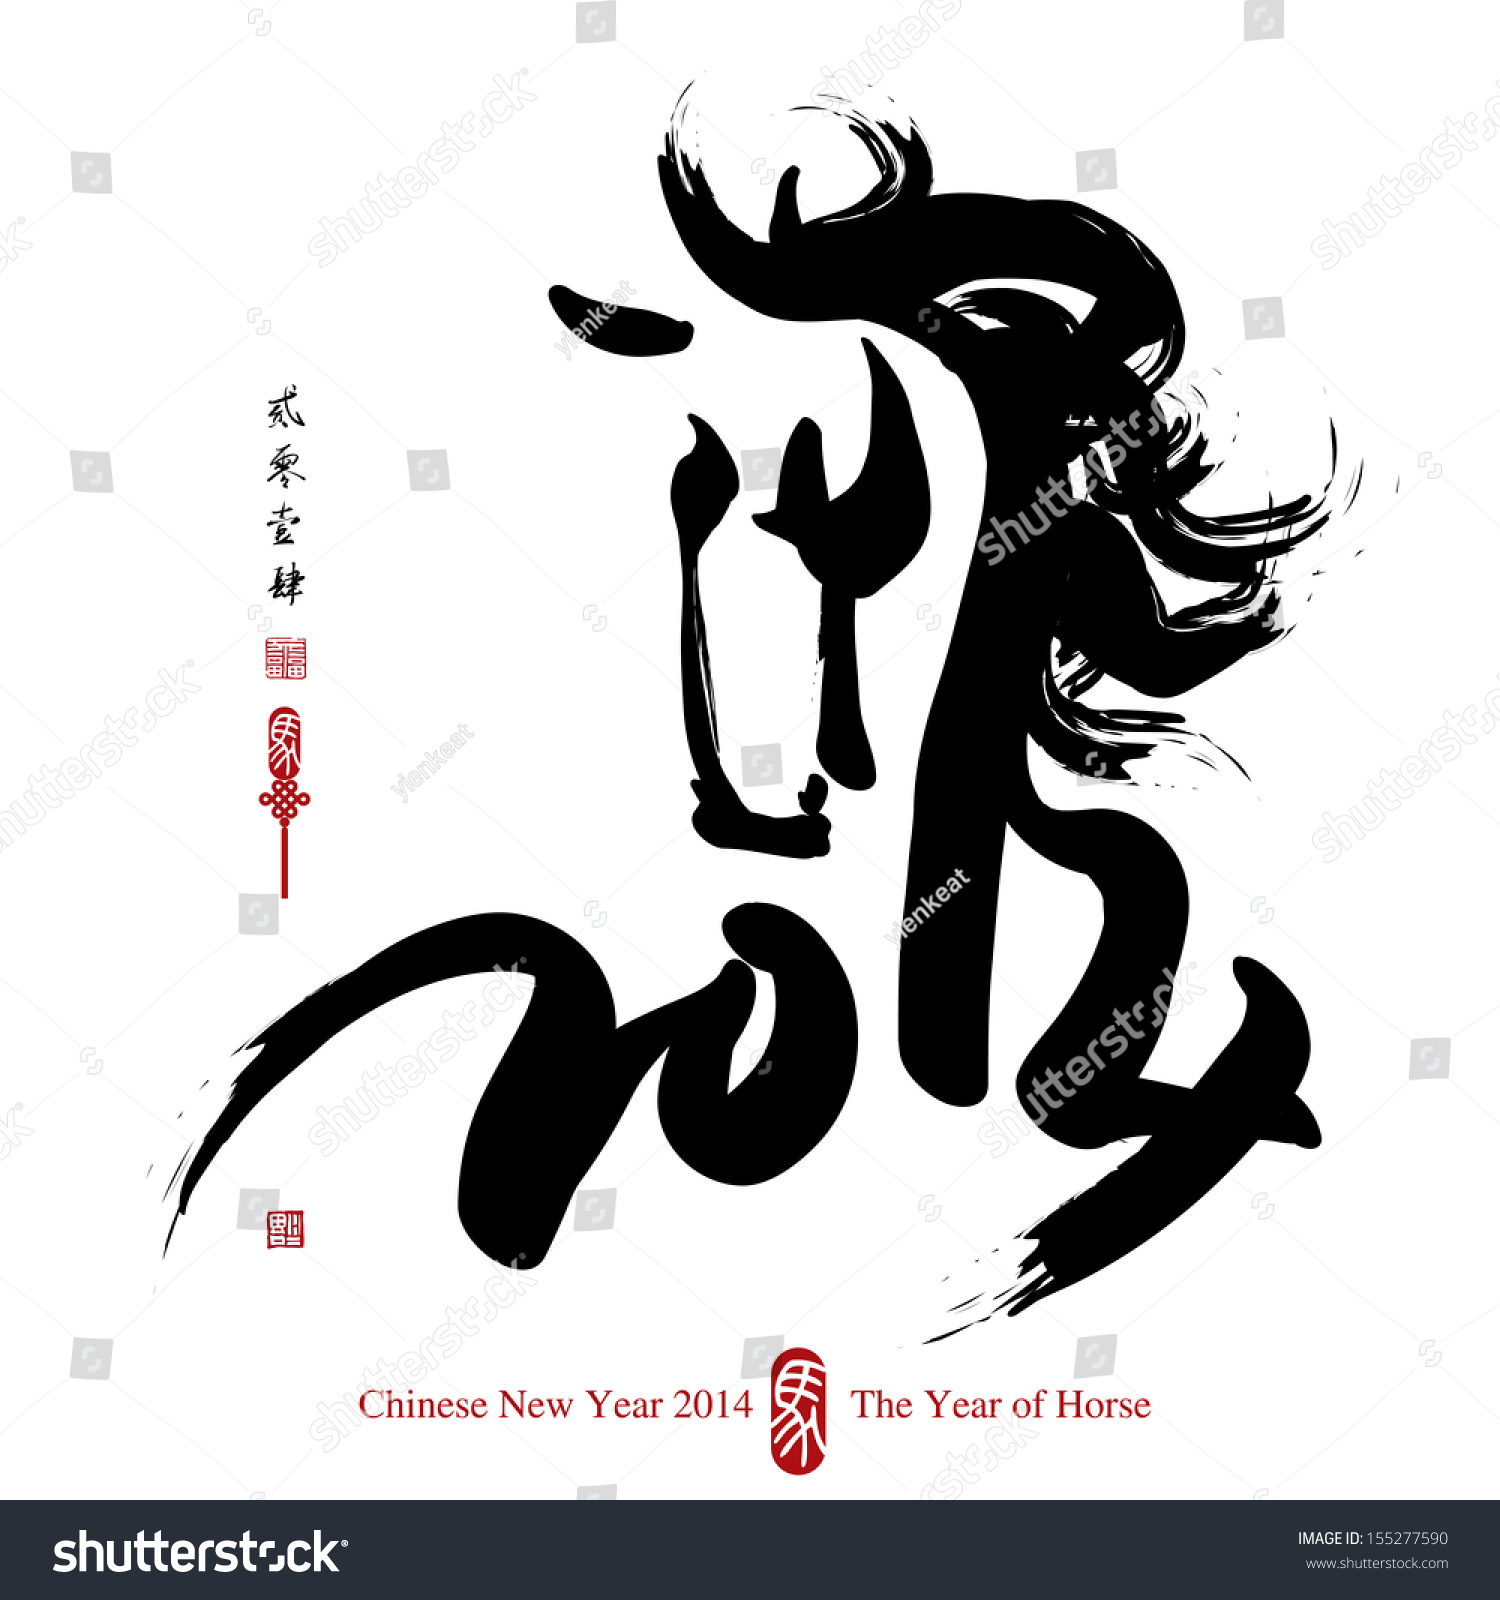 clip art chinese horse - photo #18